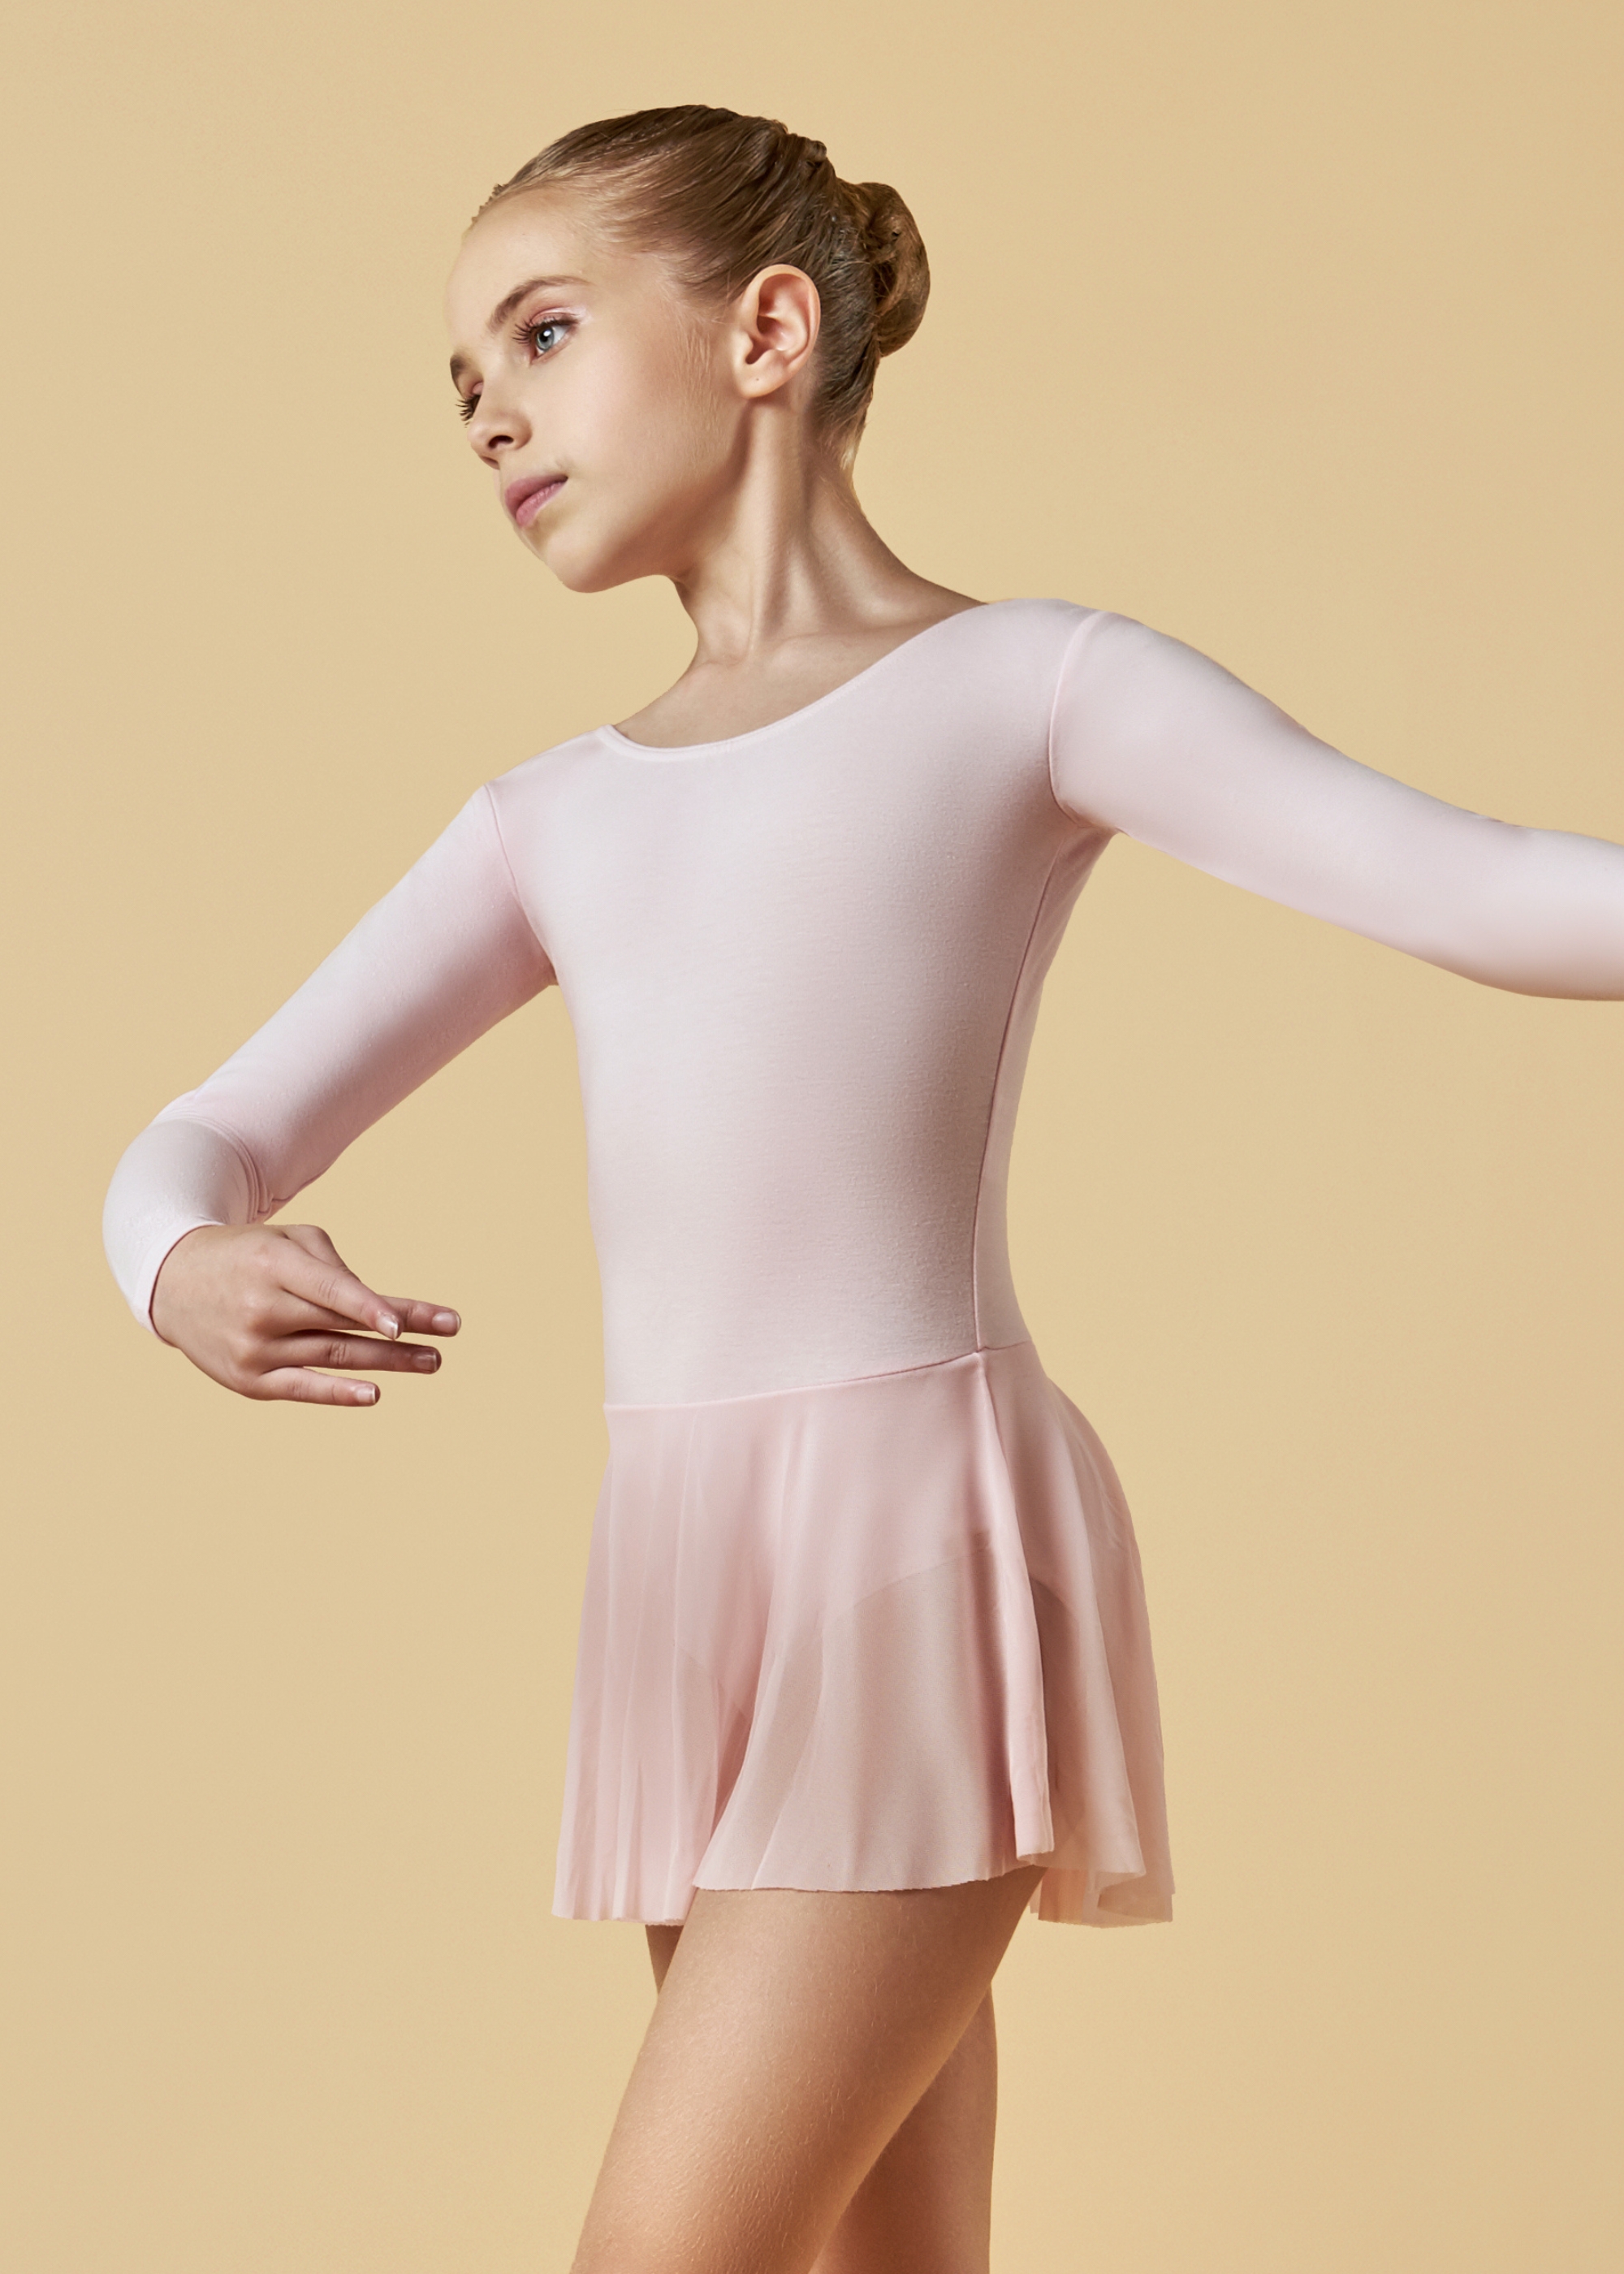 DOMENICA long sleeve leotard with mesh skirt by Grand Prix